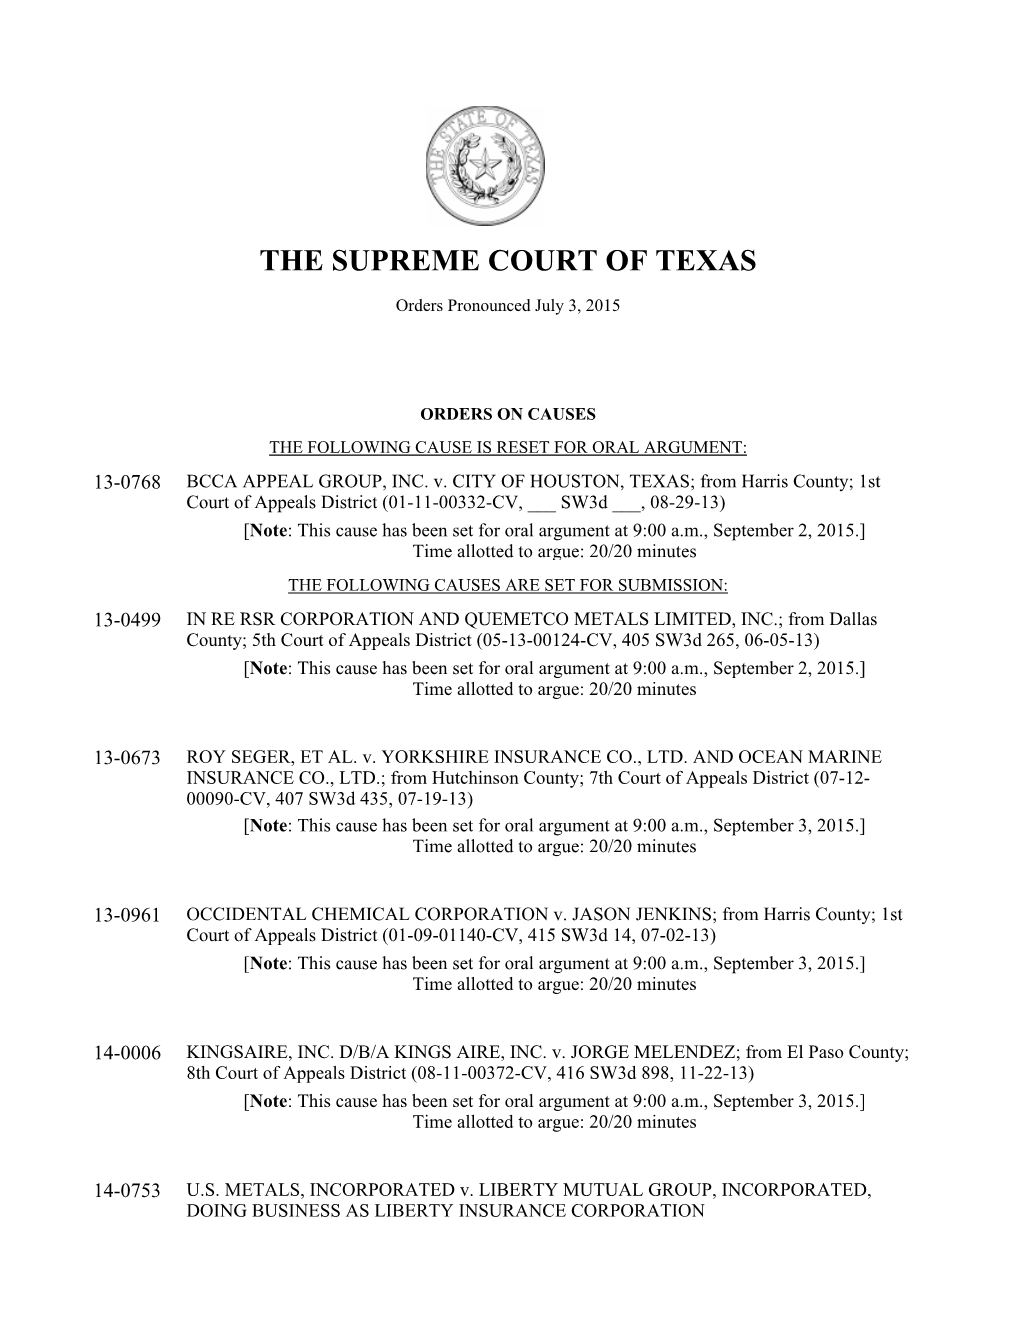 The Supreme Court of Texas